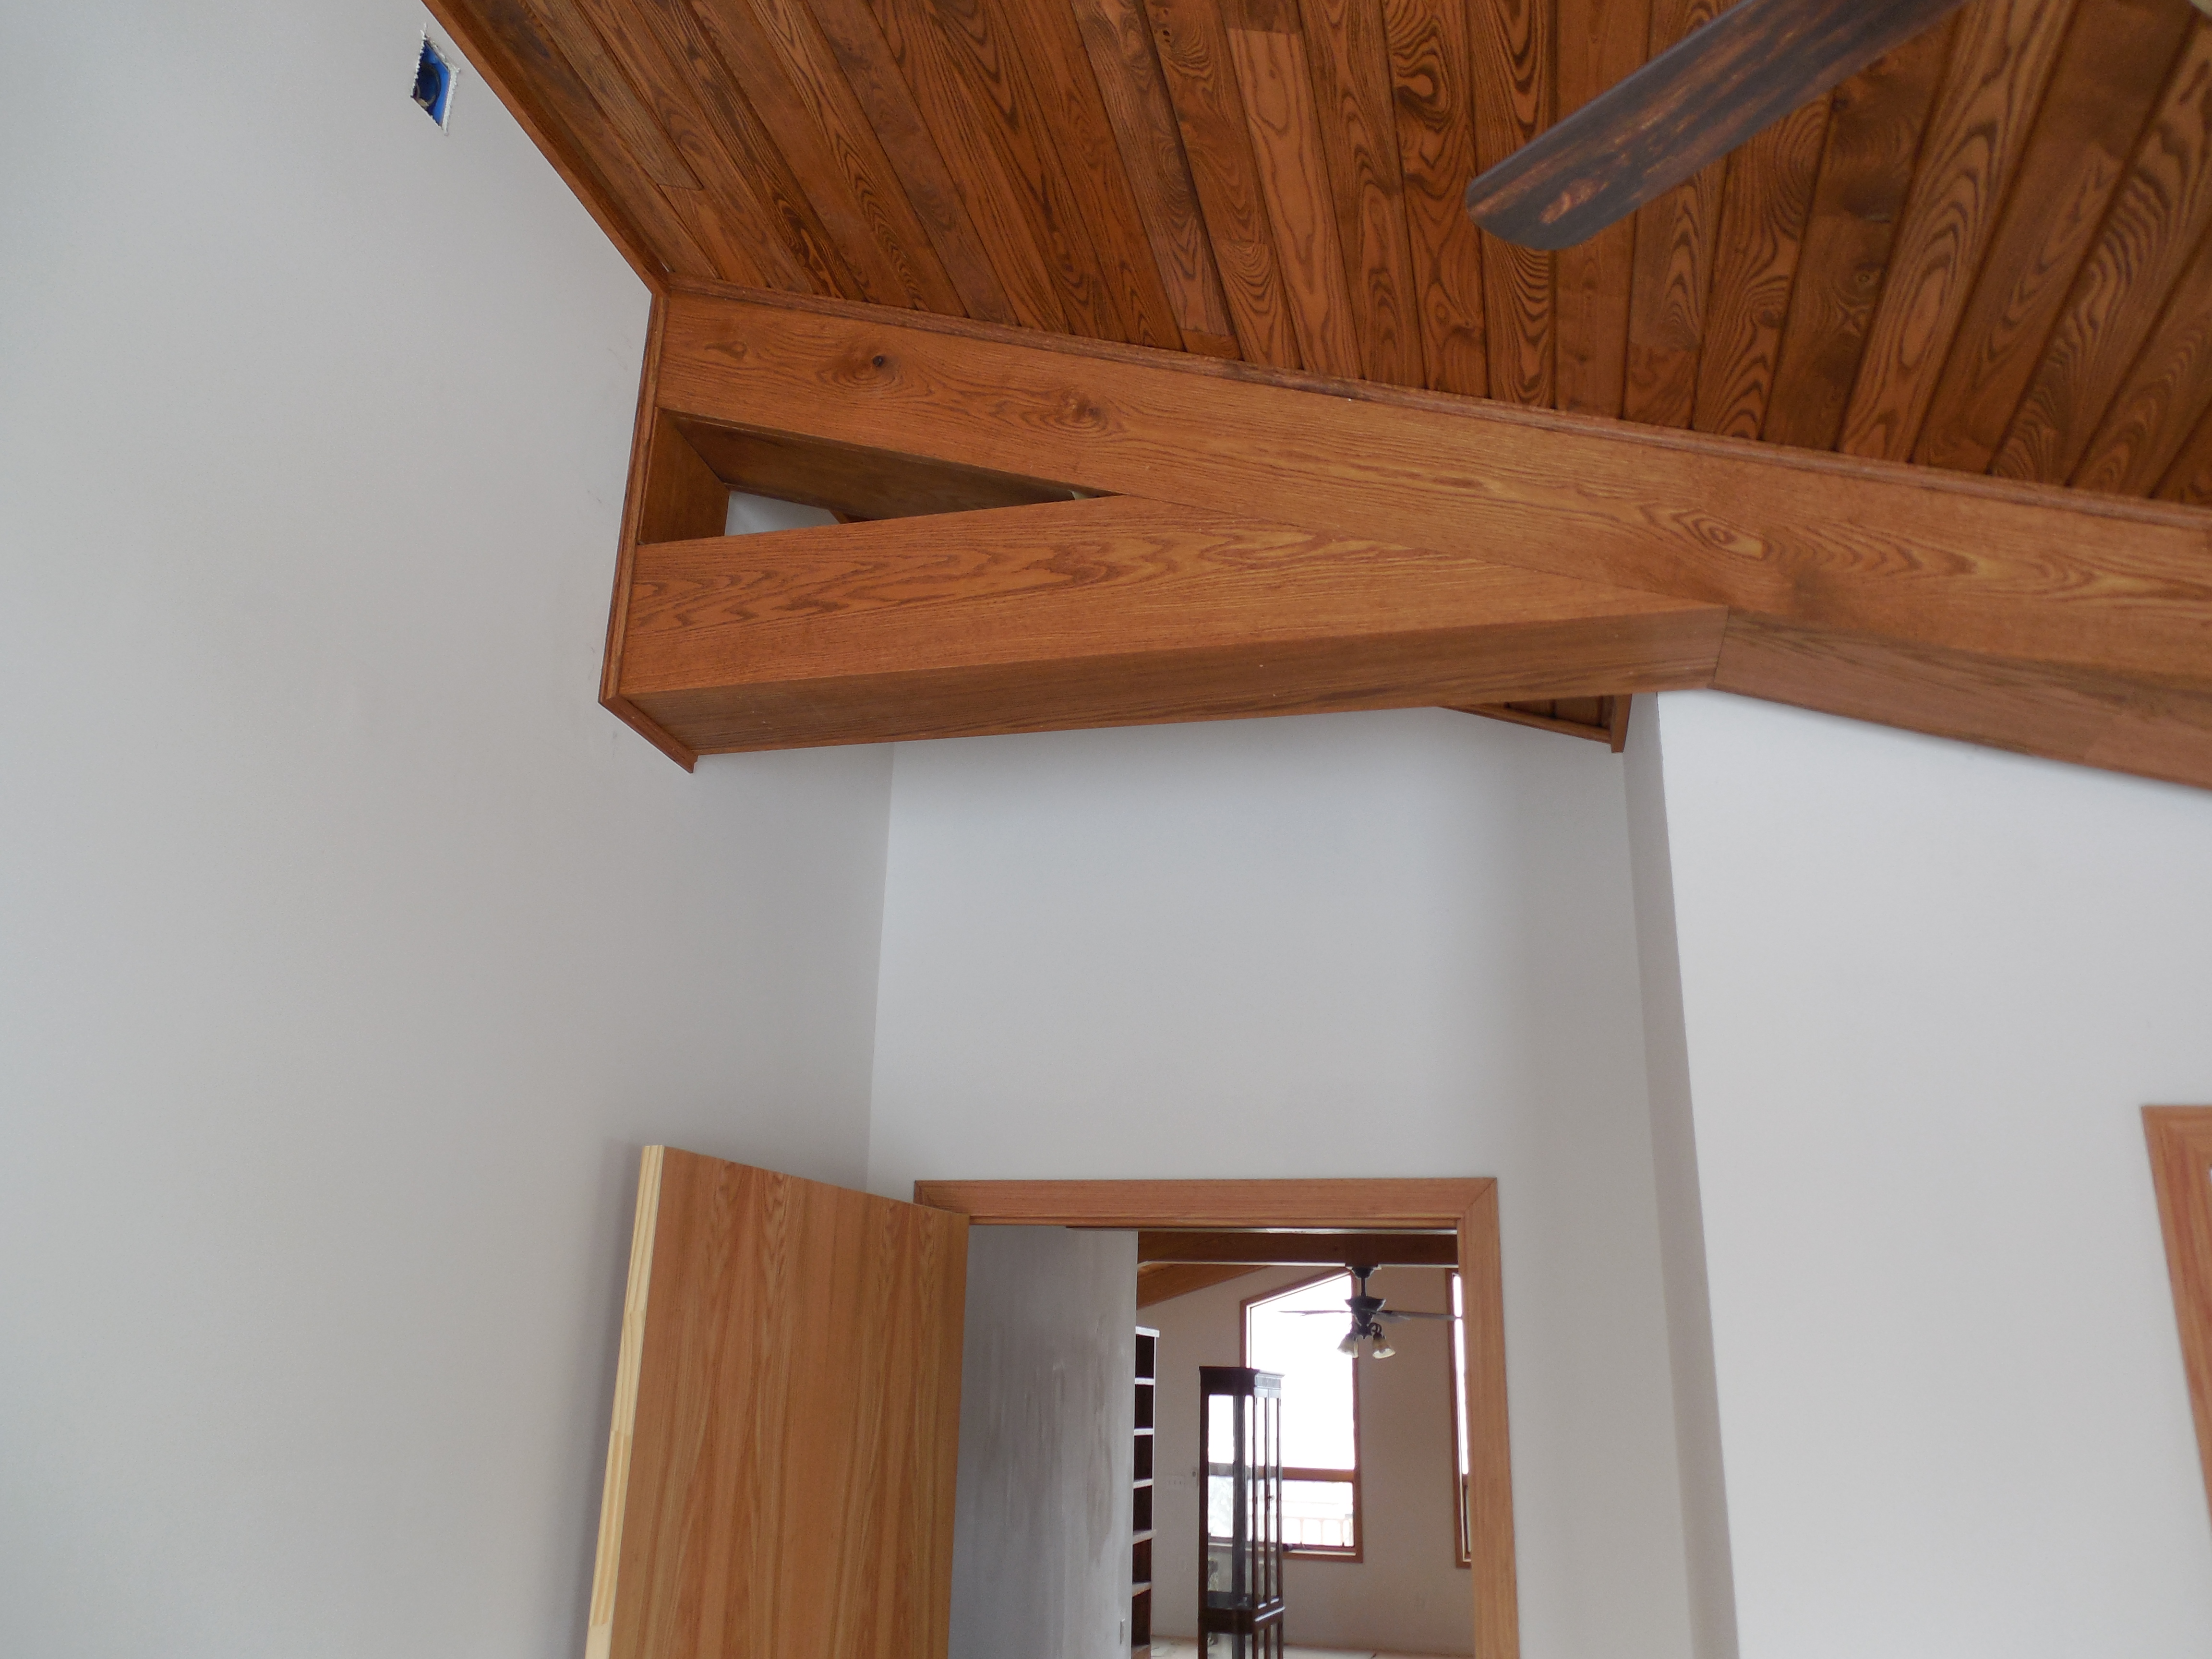 Wood covered beam in bedroom